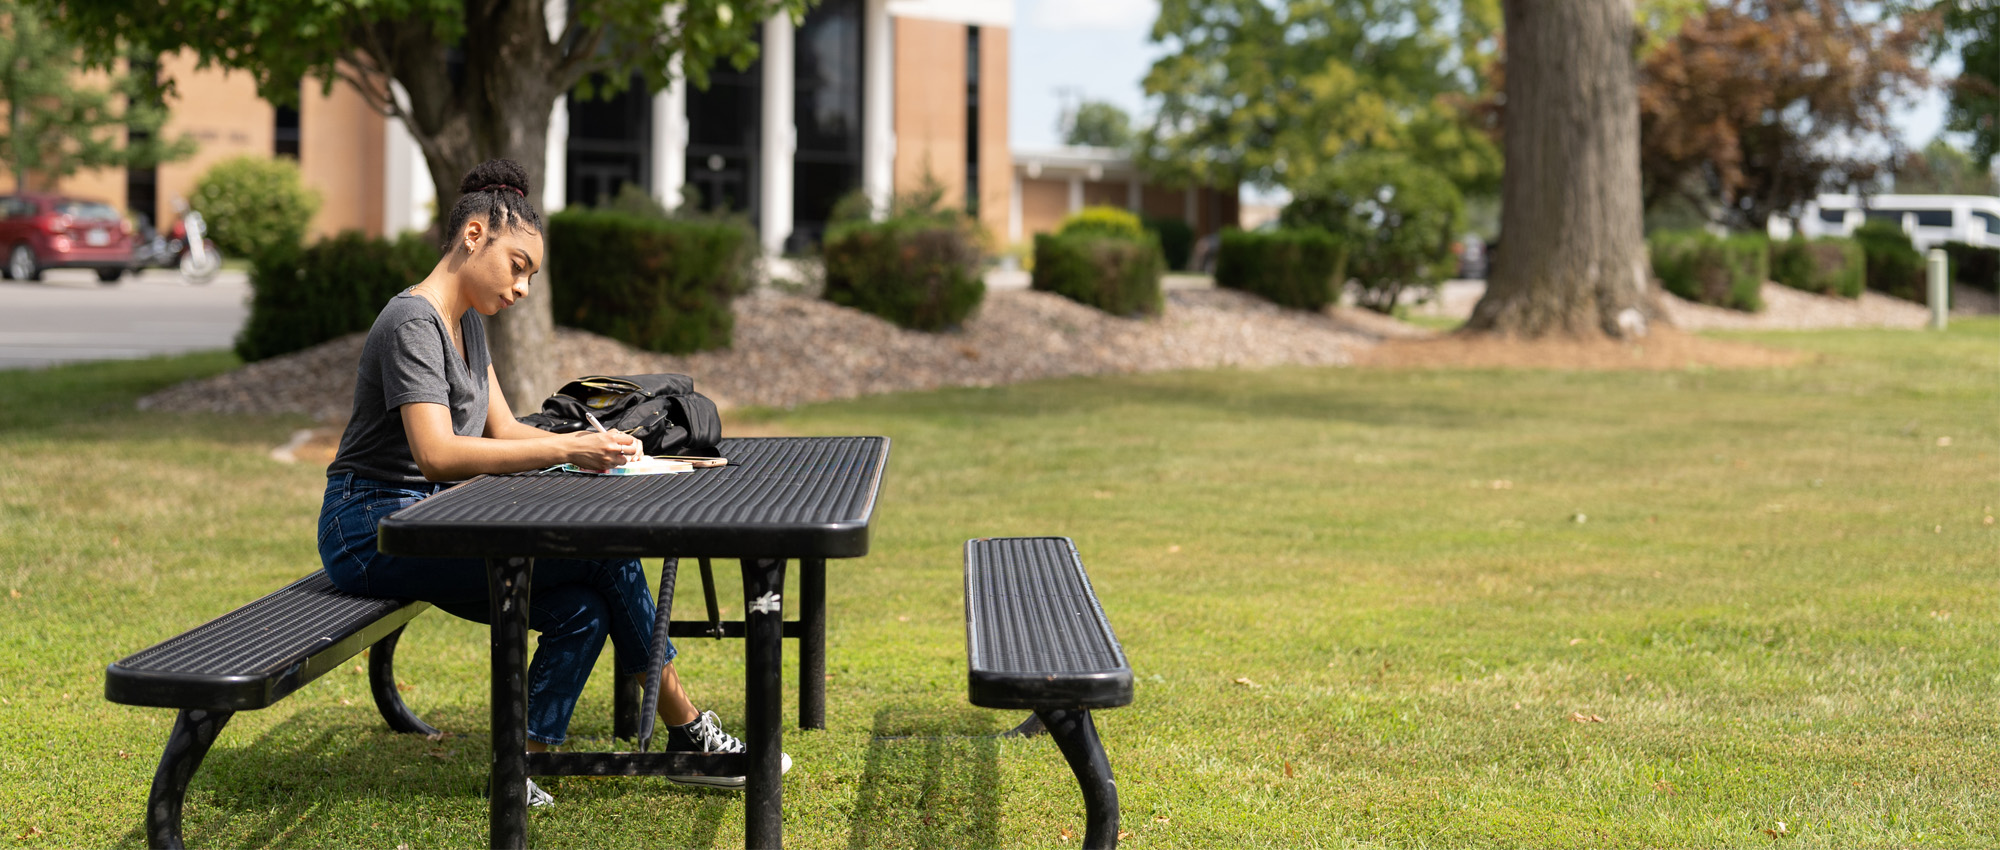 Student Studying Outside on CCCB Campus